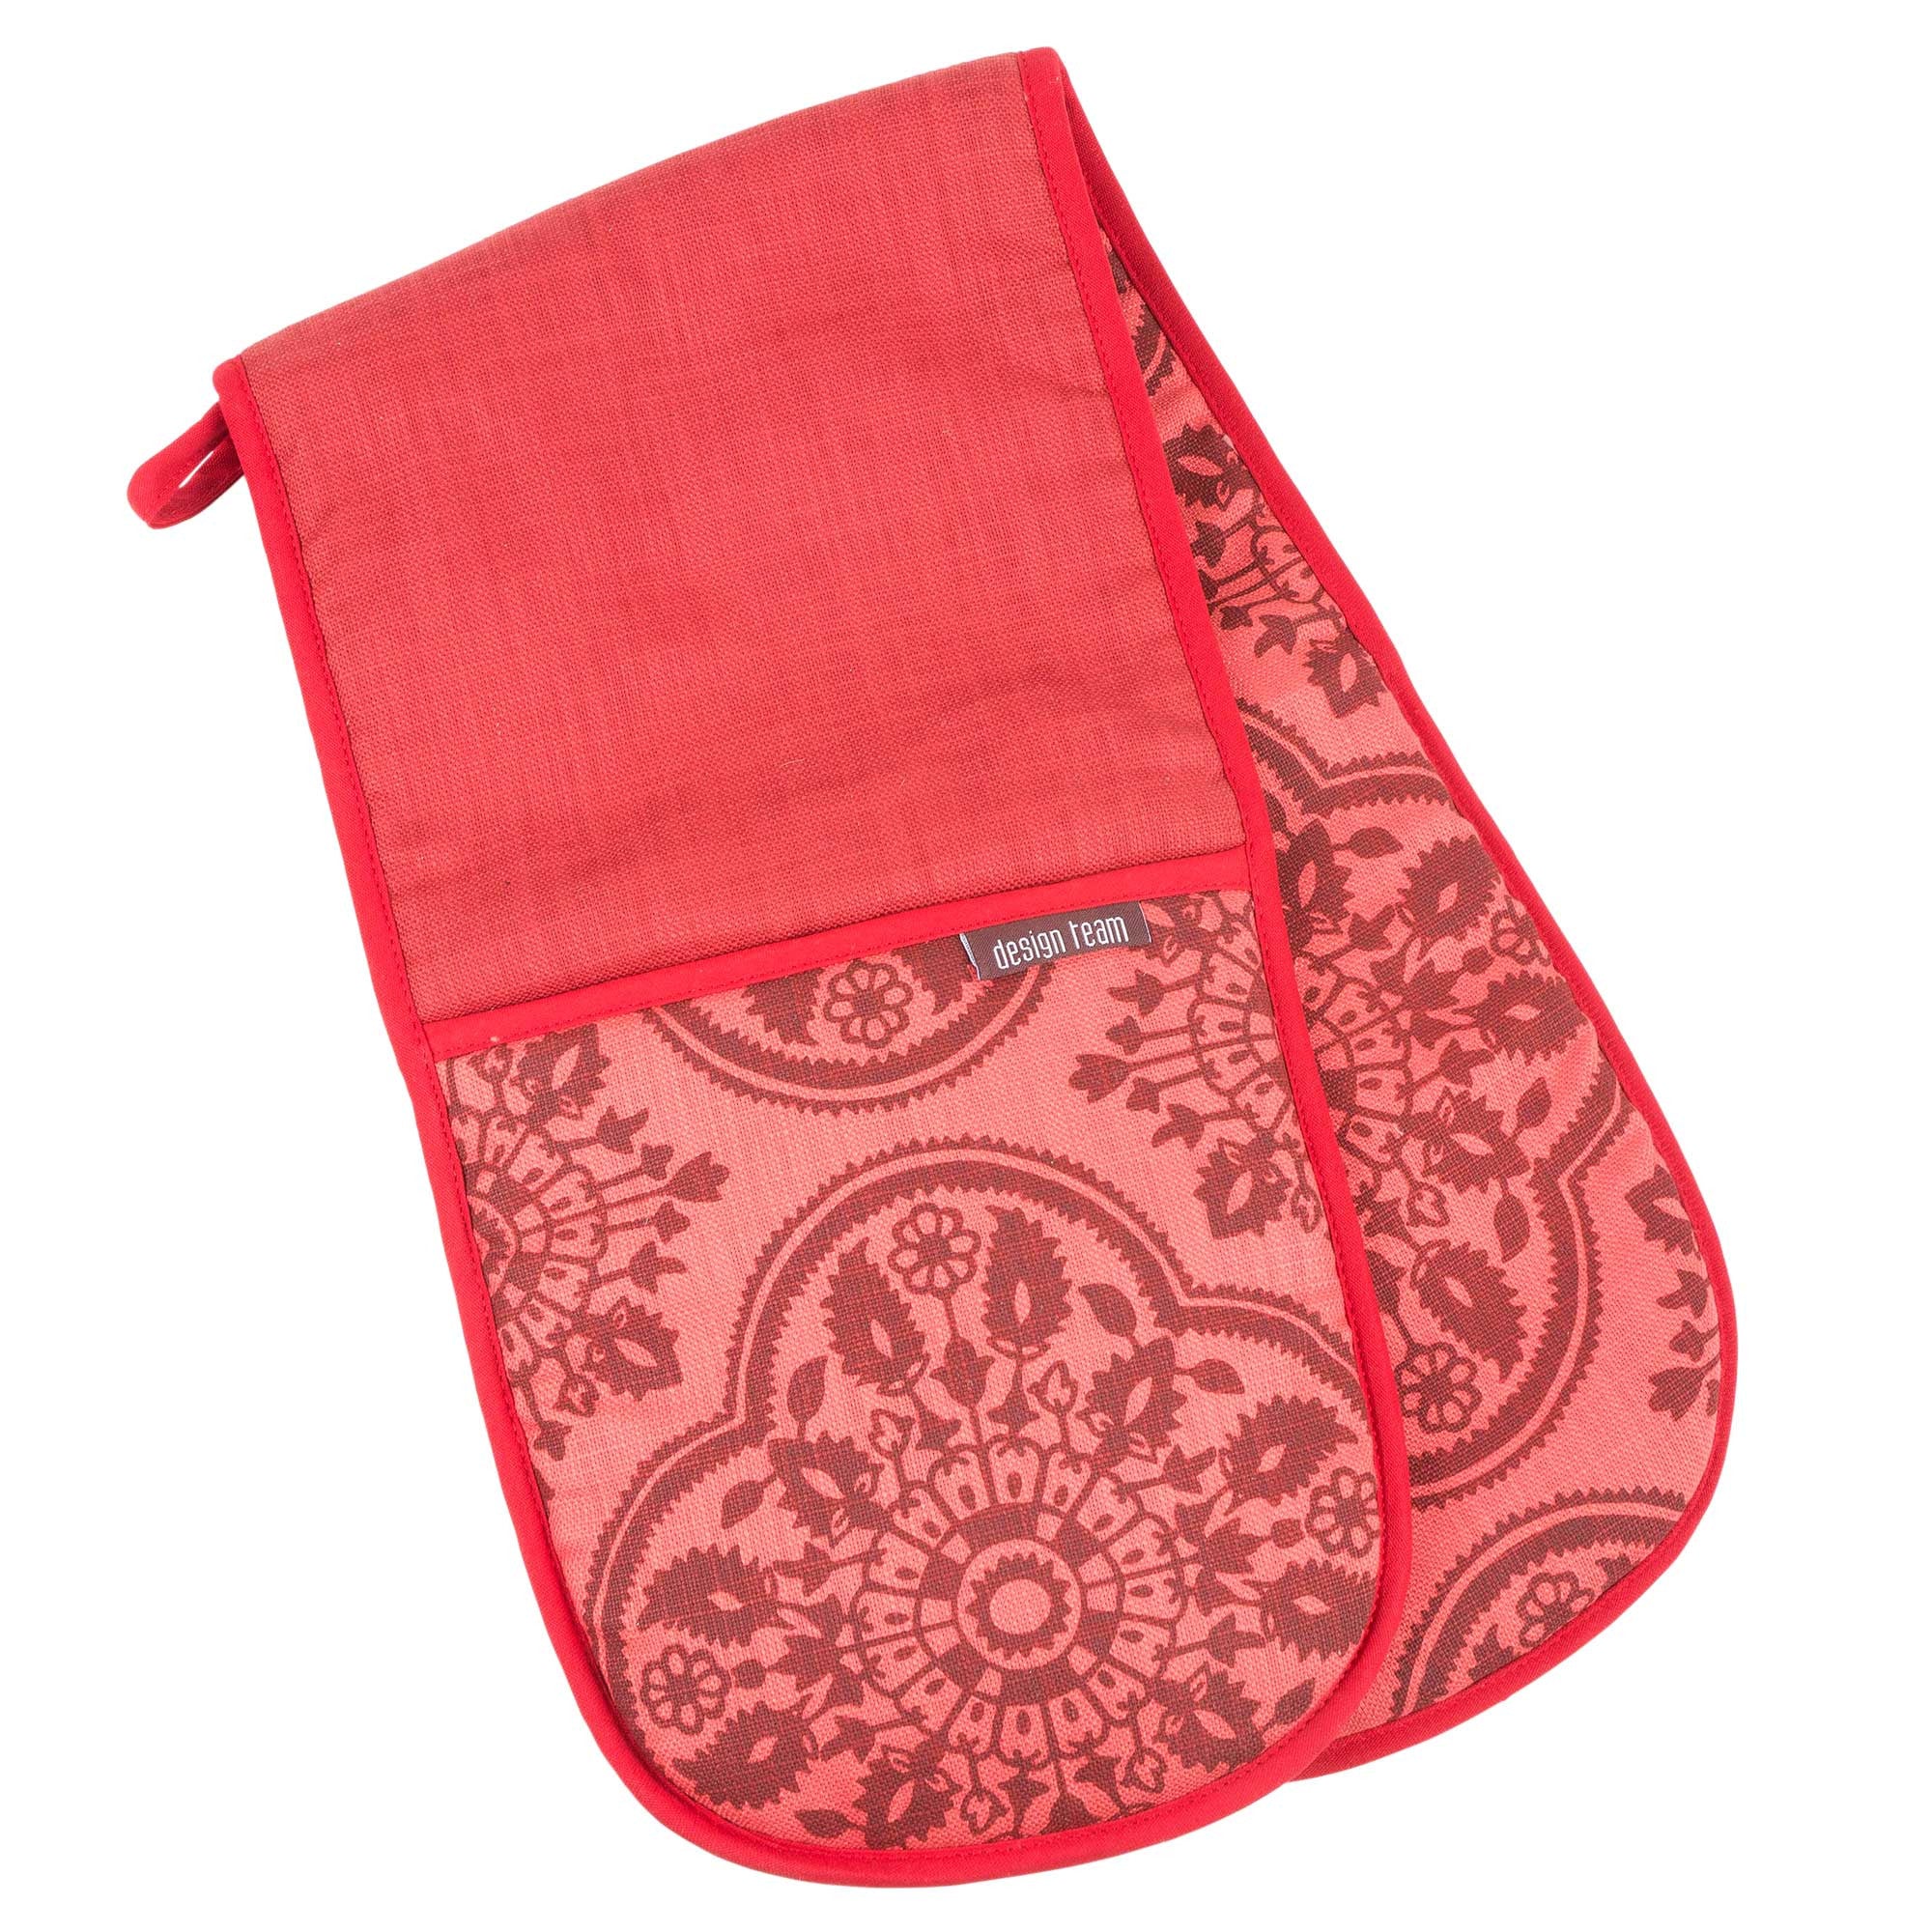 Red Keswick oven gloves